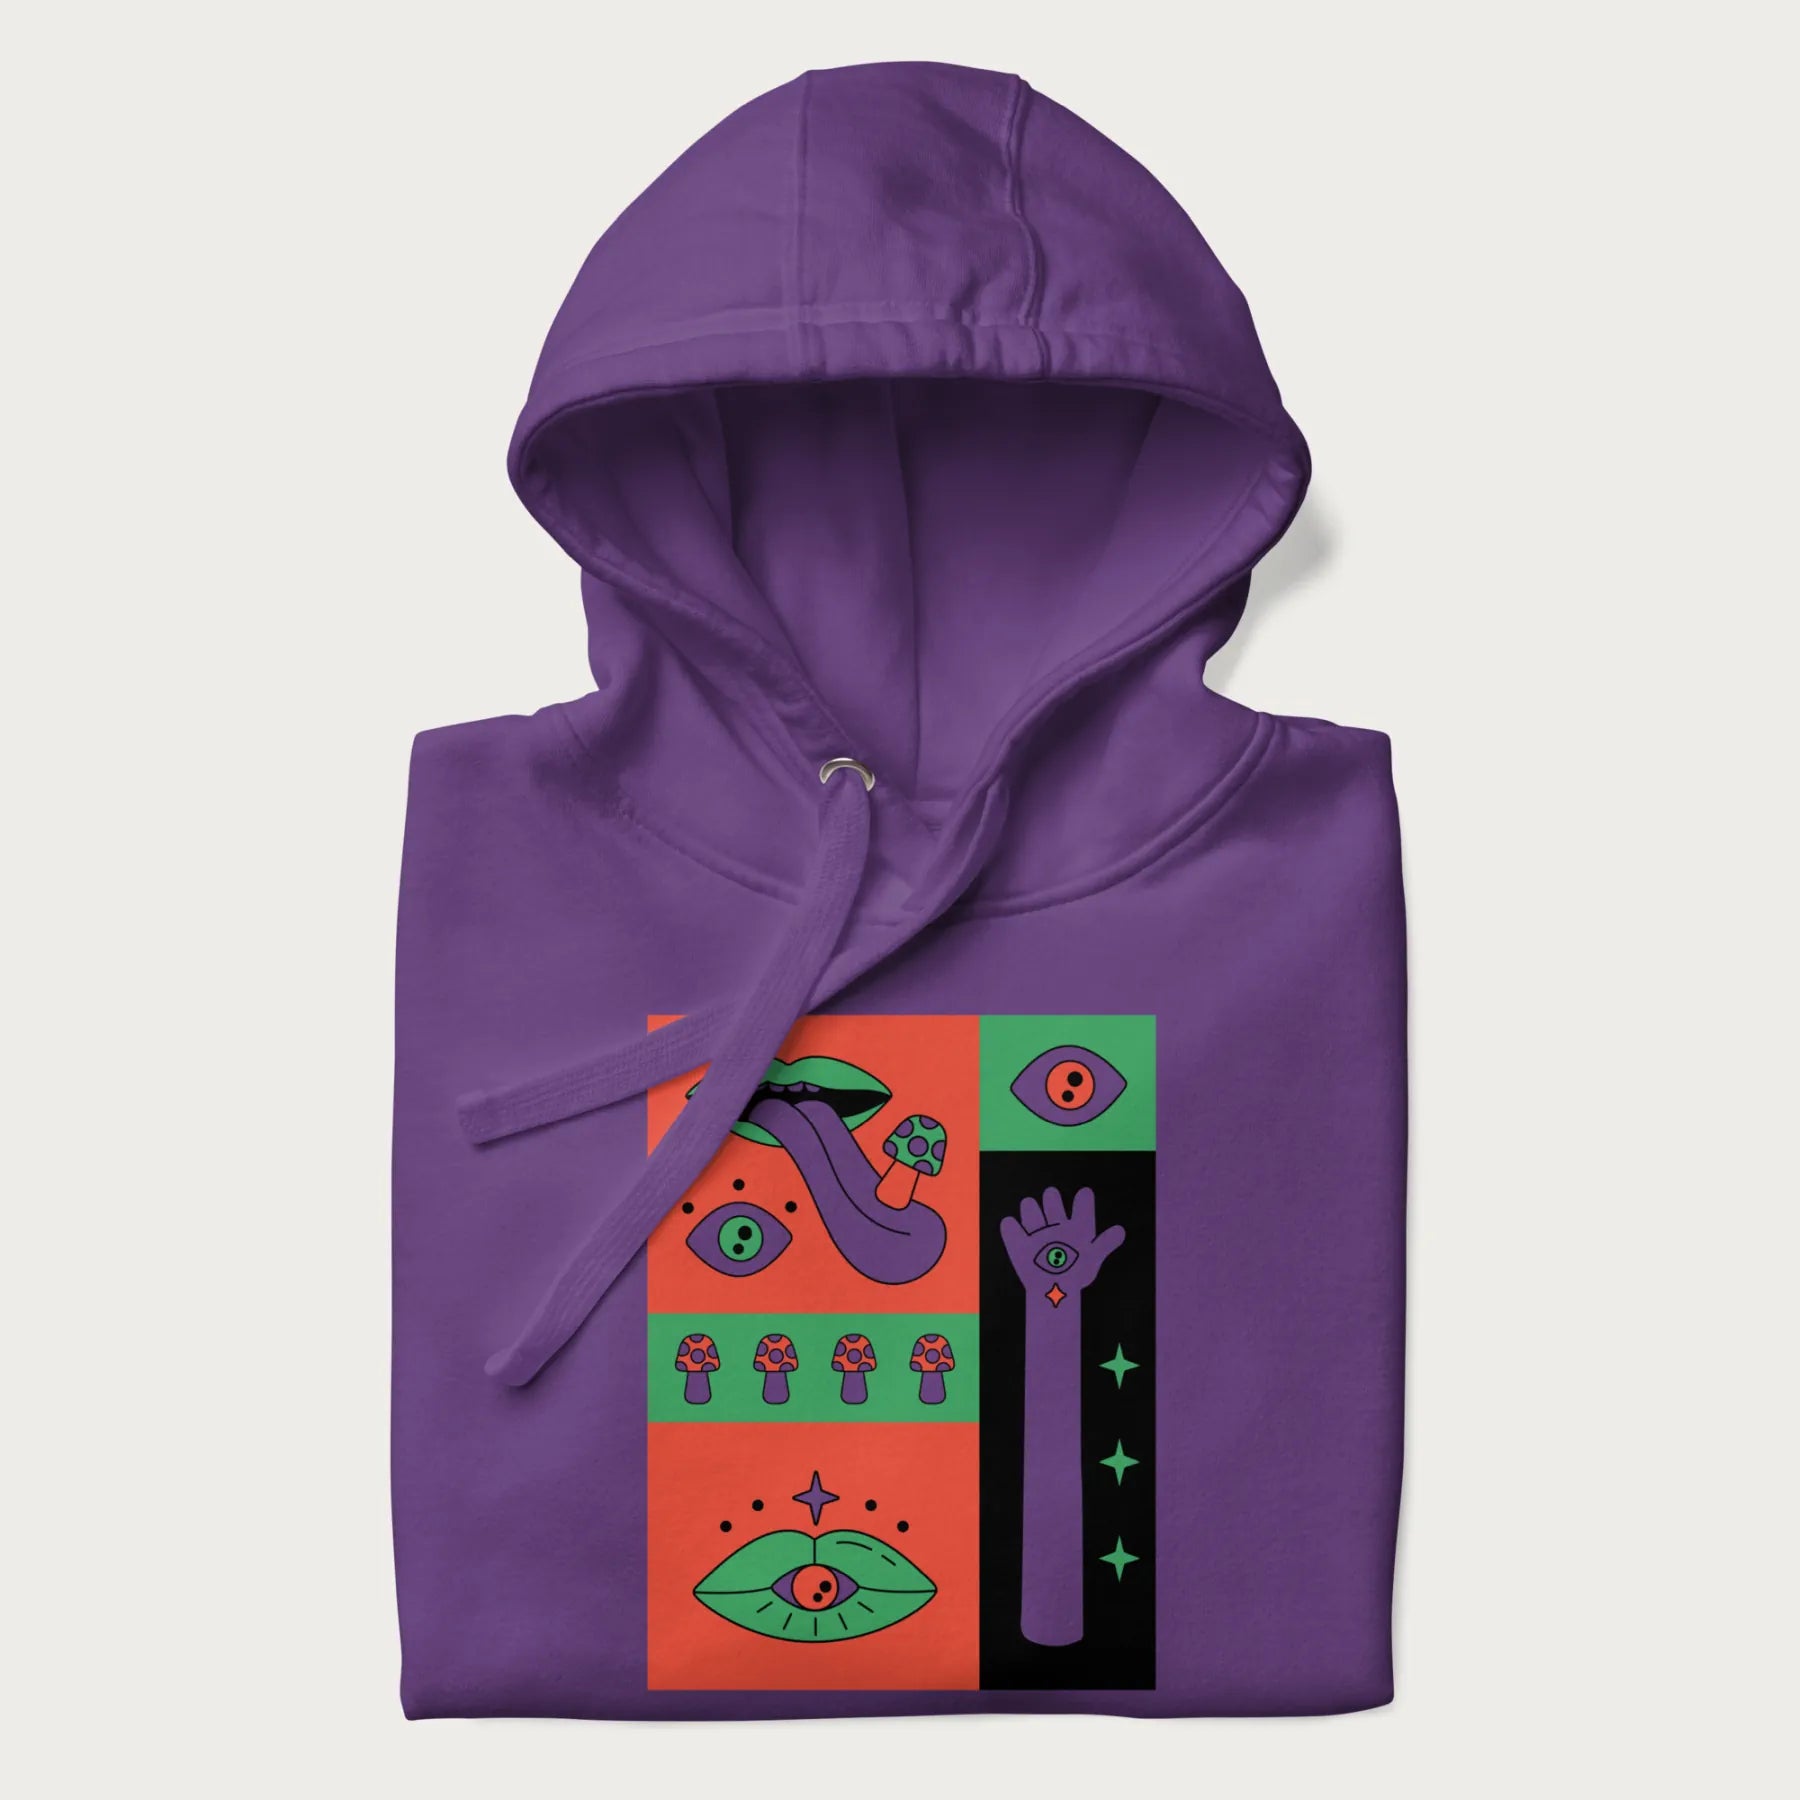 Folded purple hoodie with mushroom psychedelic designs of surreal elements like lips, eyes, and mushrooms.